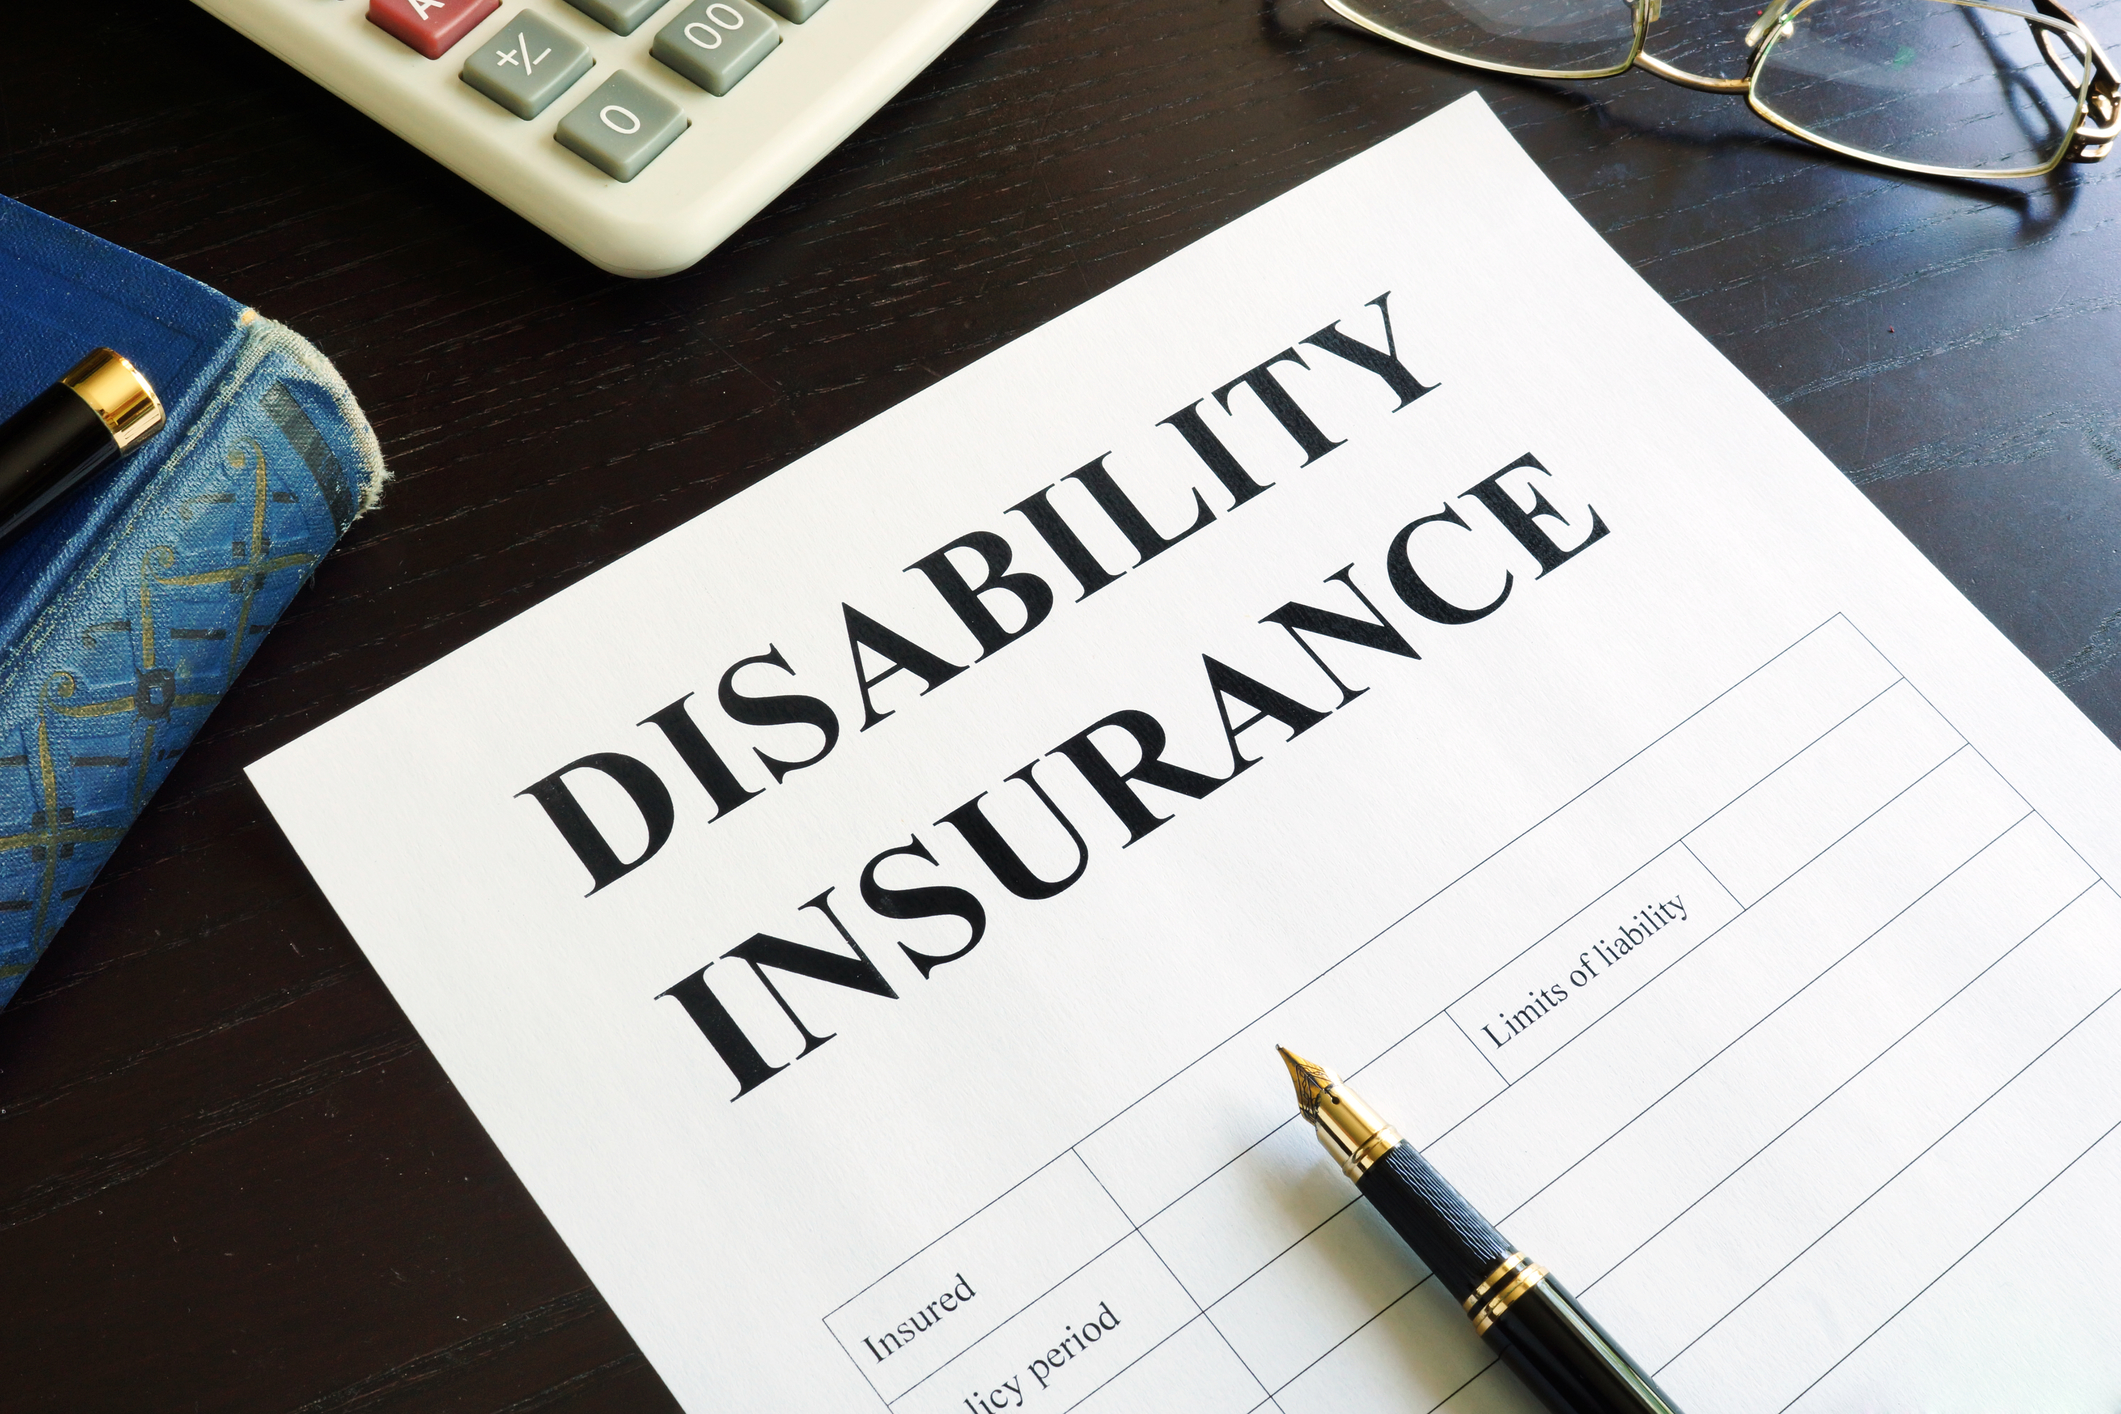 5 Things to Know About Online Disability Insurance Seller Breeze